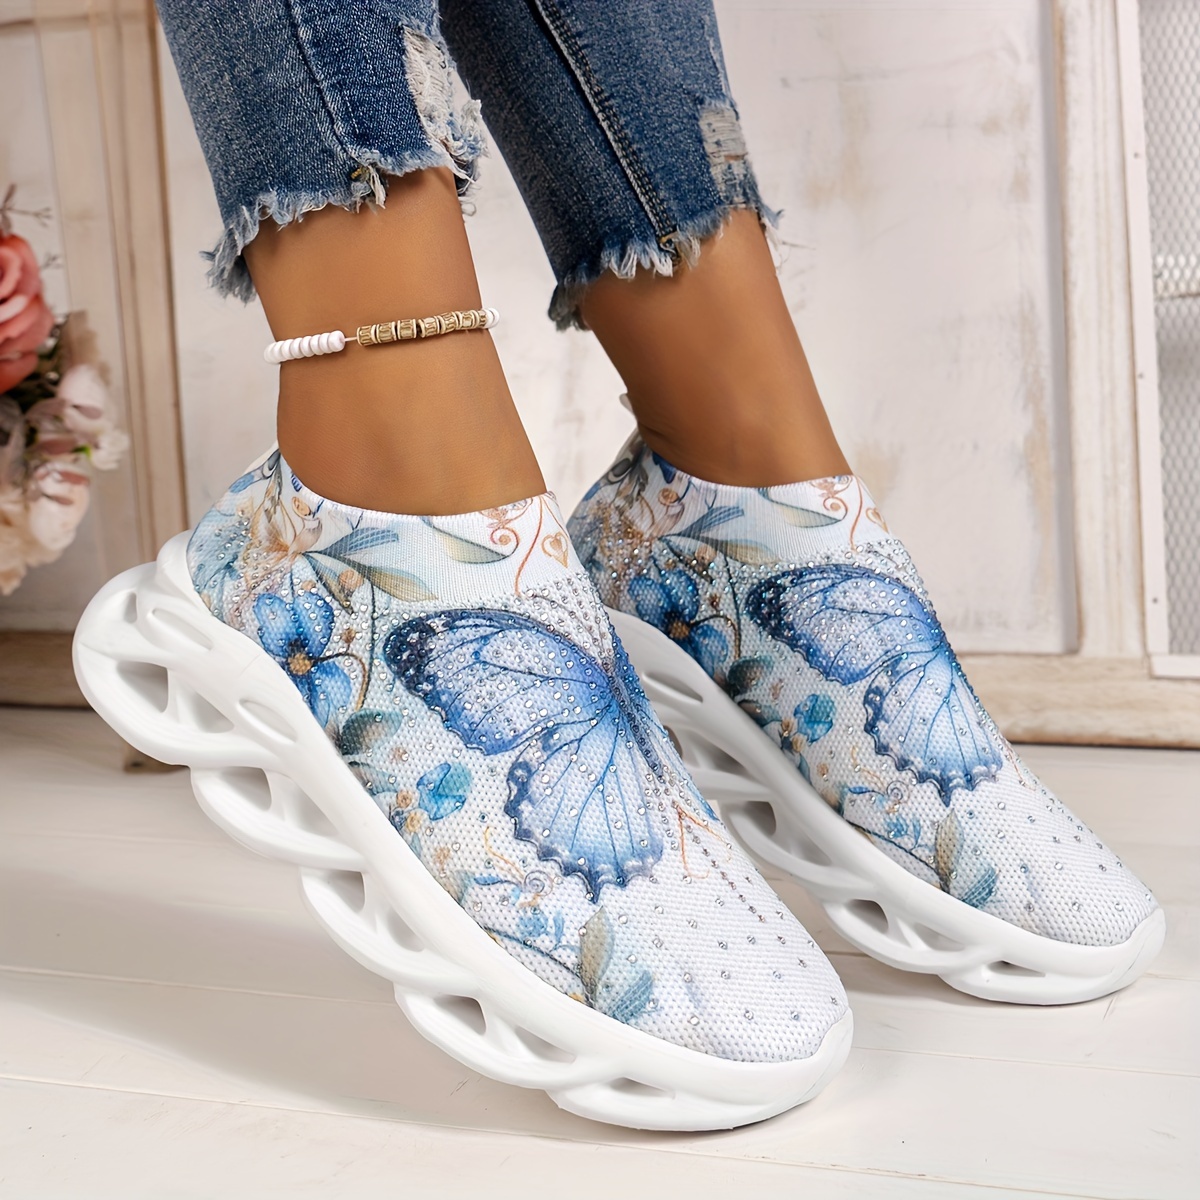 

Women's Lightweight Sneakers, Breathable Athletic Shoes With Butterfly Pattern, Fashion Low Top Slip On Trainers